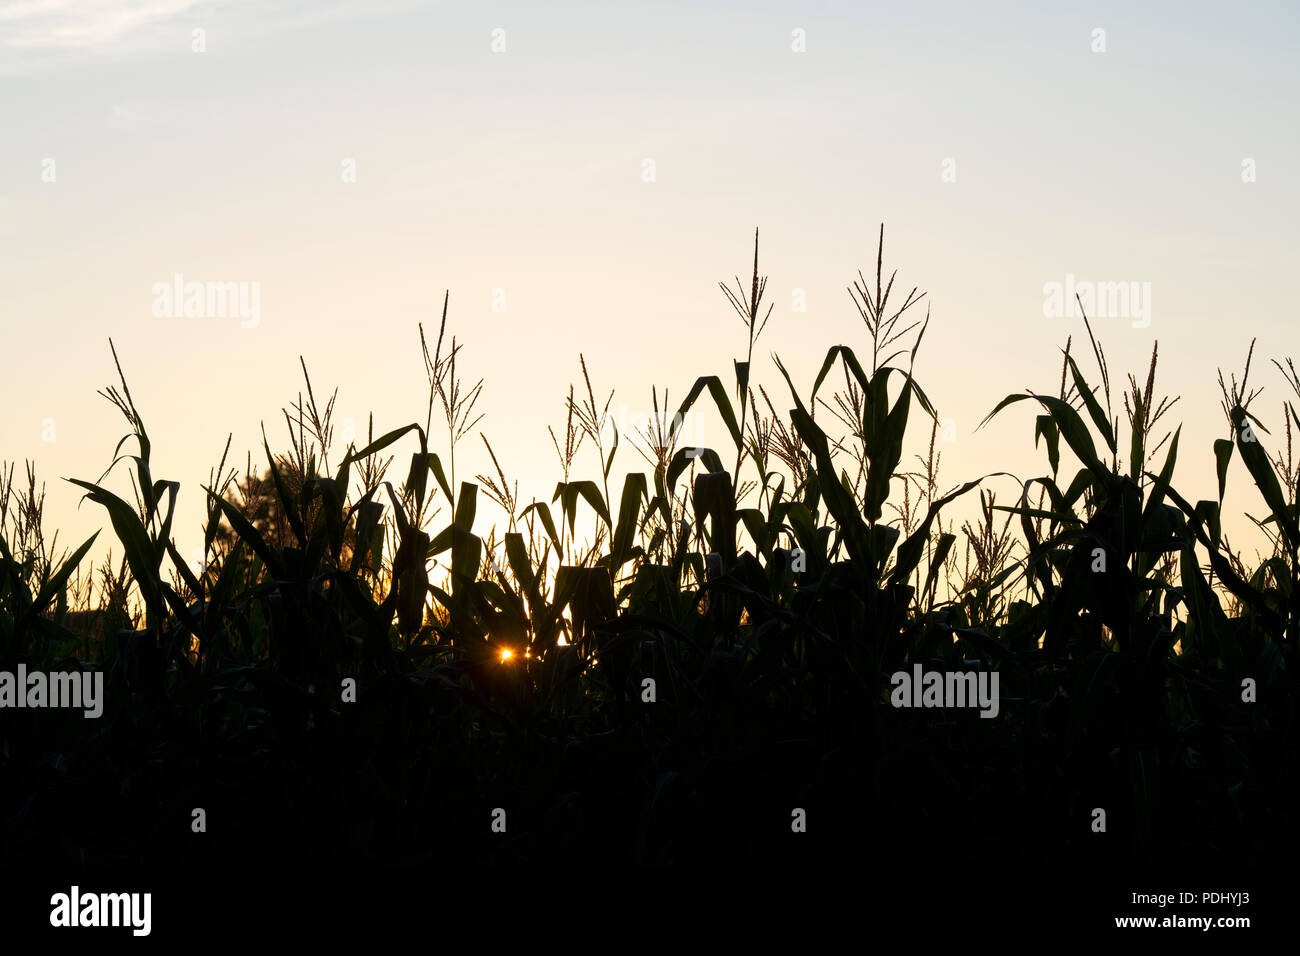 Zea mays. Silhouette Field of Maize / Corn growing in the Oxfordshire countryside at sunrise. UK Stock Photo